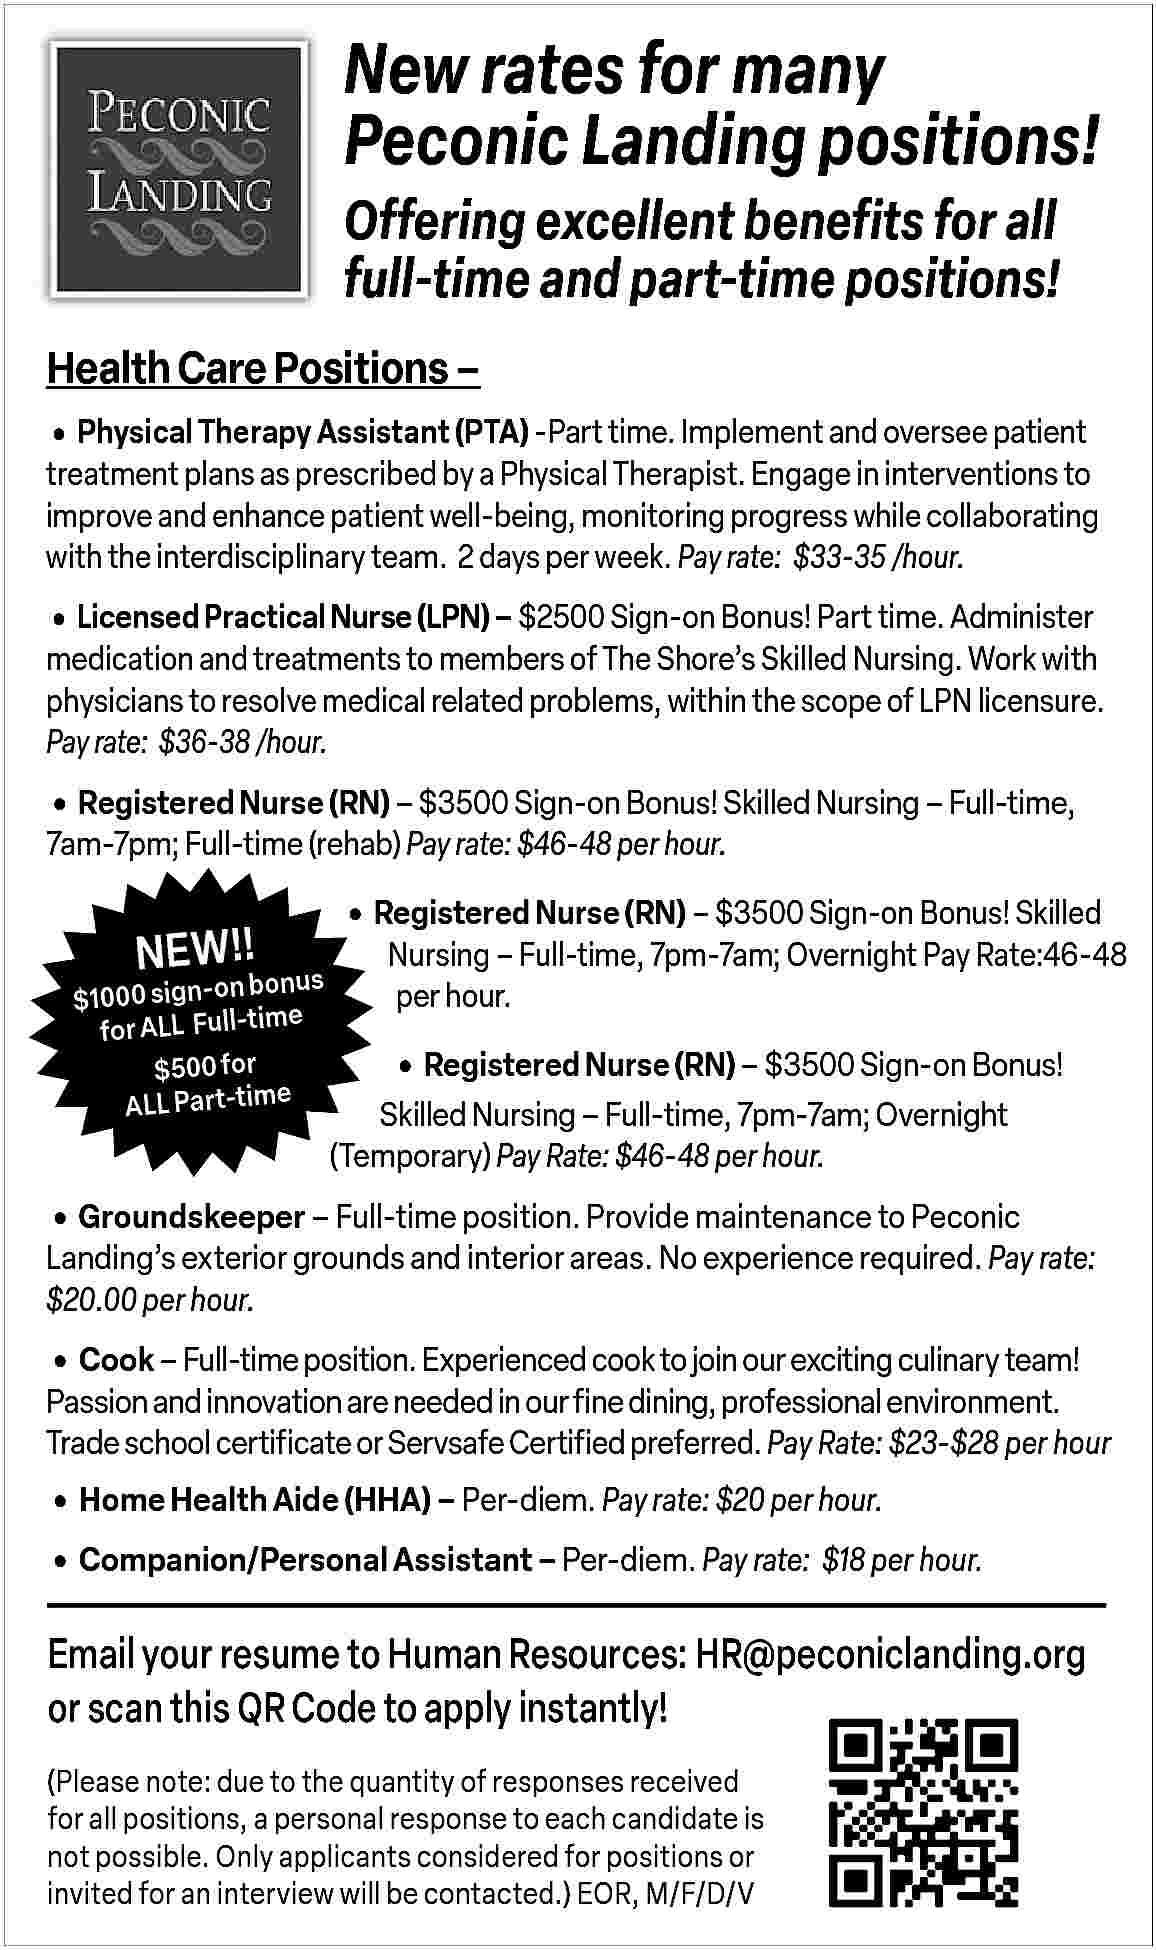 New rates for many <br>Peconic  New rates for many  Peconic Landing positions!  Offering excellent benefits for all  full-time and part-time positions!  Health Care Positions               Physical Therapy Assistant (PTA) -Part time. Implement and oversee patient  treatment plans as prescribed by a Physical Therapist. Engage in interventions to  improve and enhance patient well-being, monitoring progress while collaborating  with the interdisciplinary team. 2 days per week. Pay rate: $33-35 /hour.        Licensed Practical Nurse (LPN)     $2500 Sign-on Bonus! Part time. Administer    medication and treatments to members of The Shore   s Skilled Nursing. Work with  physicians to resolve medical related problems, within the scope of LPN licensure.  Pay rate: $36-38 /hour.        Registered Nurse (RN)     $3500 Sign-on Bonus! Skilled Nursing     Full-time,  7am-7pm; Full-time (rehab) Pay rate: $46-48 per hour.    NEW!!    bonus  $1000 sign-on  e  for ALL   Full-tim  $500 for  ALL Part-time        Registered Nurse (RN)     $3500 Sign-on Bonus! Skilled    Nursing     Full-time, 7pm-7am; Overnight Pay Rate:46-48  per hour.           Registered Nurse (RN)     $3500 Sign-on Bonus!  Skilled Nursing     Full-time, 7pm-7am; Overnight  (Temporary) Pay Rate: $46-48 per hour.        Groundskeeper     Full-time position. Provide maintenance to Peconic    Landing   s exterior grounds and interior areas. No experience required. Pay rate:  $20.00 per hour.        Cook     Full-time position. Experienced cook to join our exciting culinary team!    Passion and innovation are needed in our fine dining, professional environment.  Trade school certificate or Servsafe Certified preferred. Pay Rate: $23-$28 per hour        Home Health Aide (HHA)     Per-diem. Pay rate: $20 per hour.      Companion/Personal Assistant     Per-diem. Pay rate: $18 per hour.    Email your resume to Human Resources: HR@peconiclanding.org  or scan this QR Code to apply instantly!  (Please note: due to the quantity of responses received  for all positions, a personal response to each candidate is  not possible. Only applicants considered for positions or  invited for an interview will be contacted.) EOR, M/F/D/V     